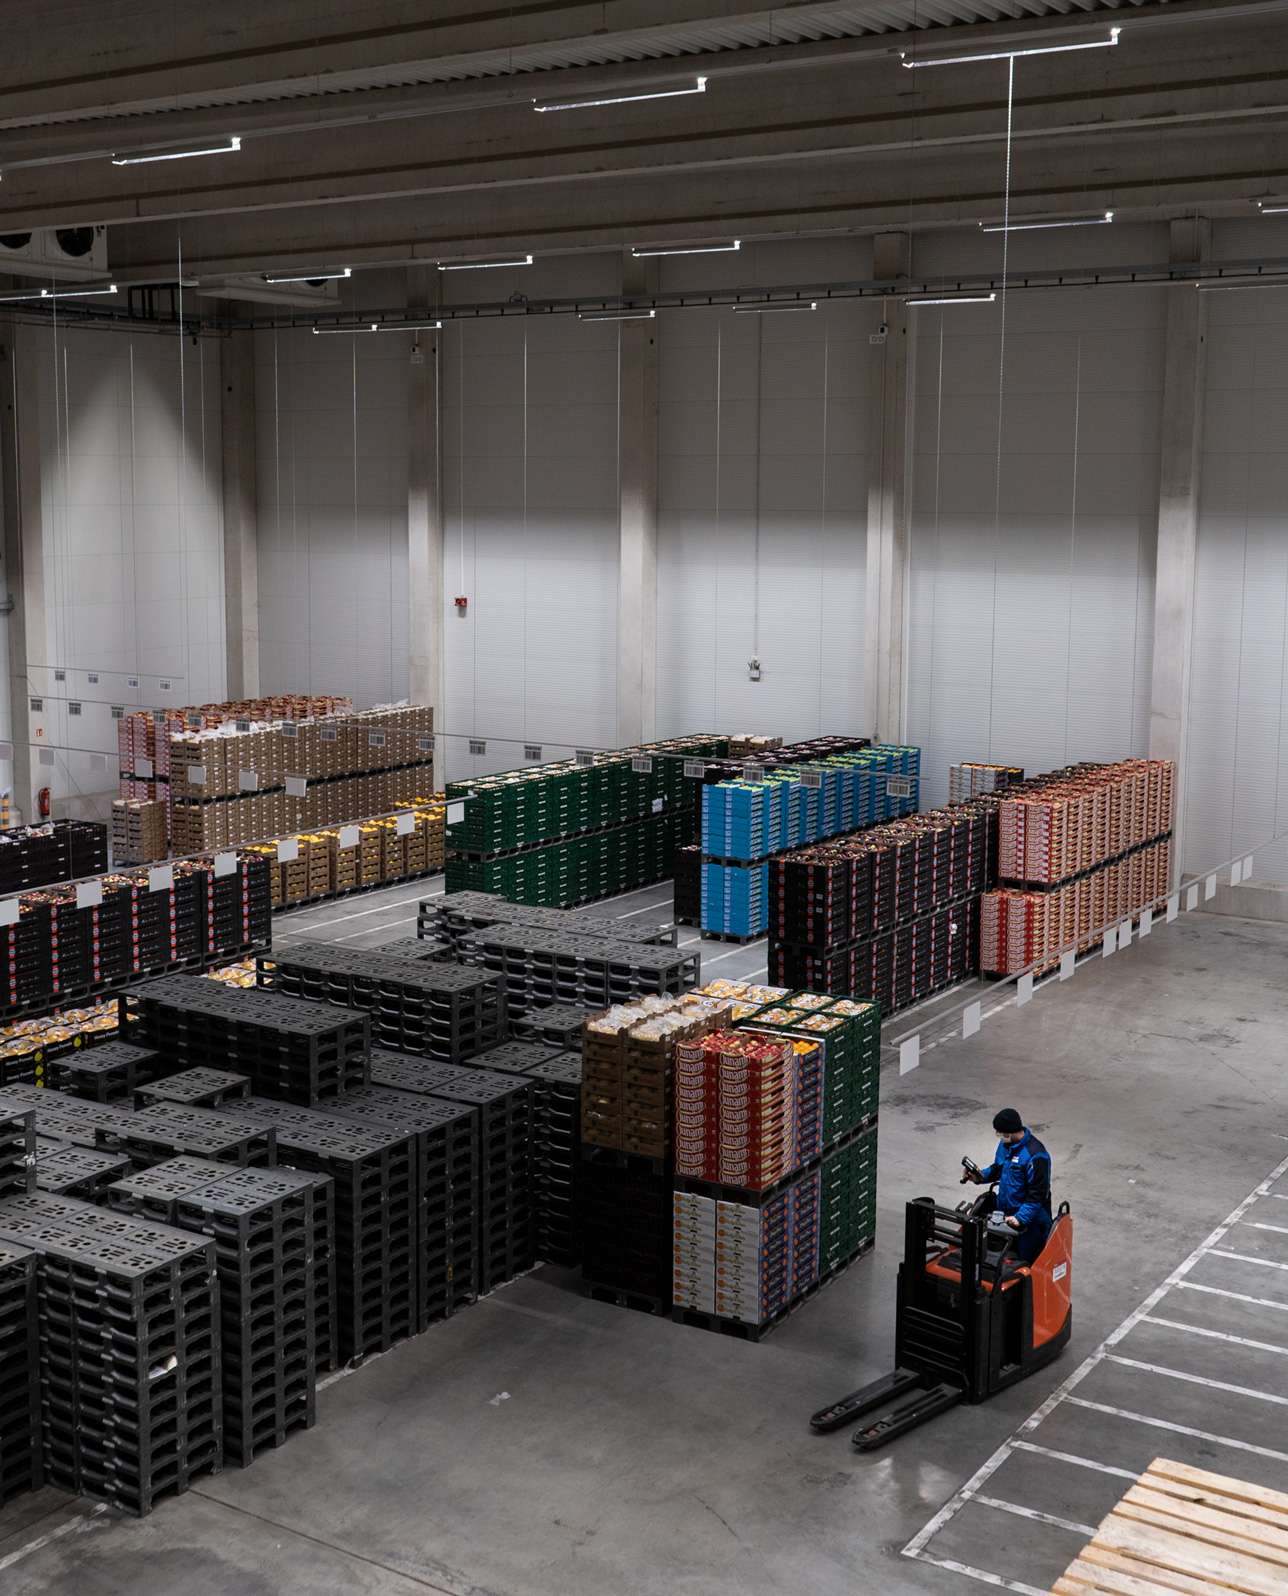 Numerous black plastic pallets and colourful boxes of fruit are stacked in a warehouse. A PAPP employee in a blue jacket is driving a red pallet truck.